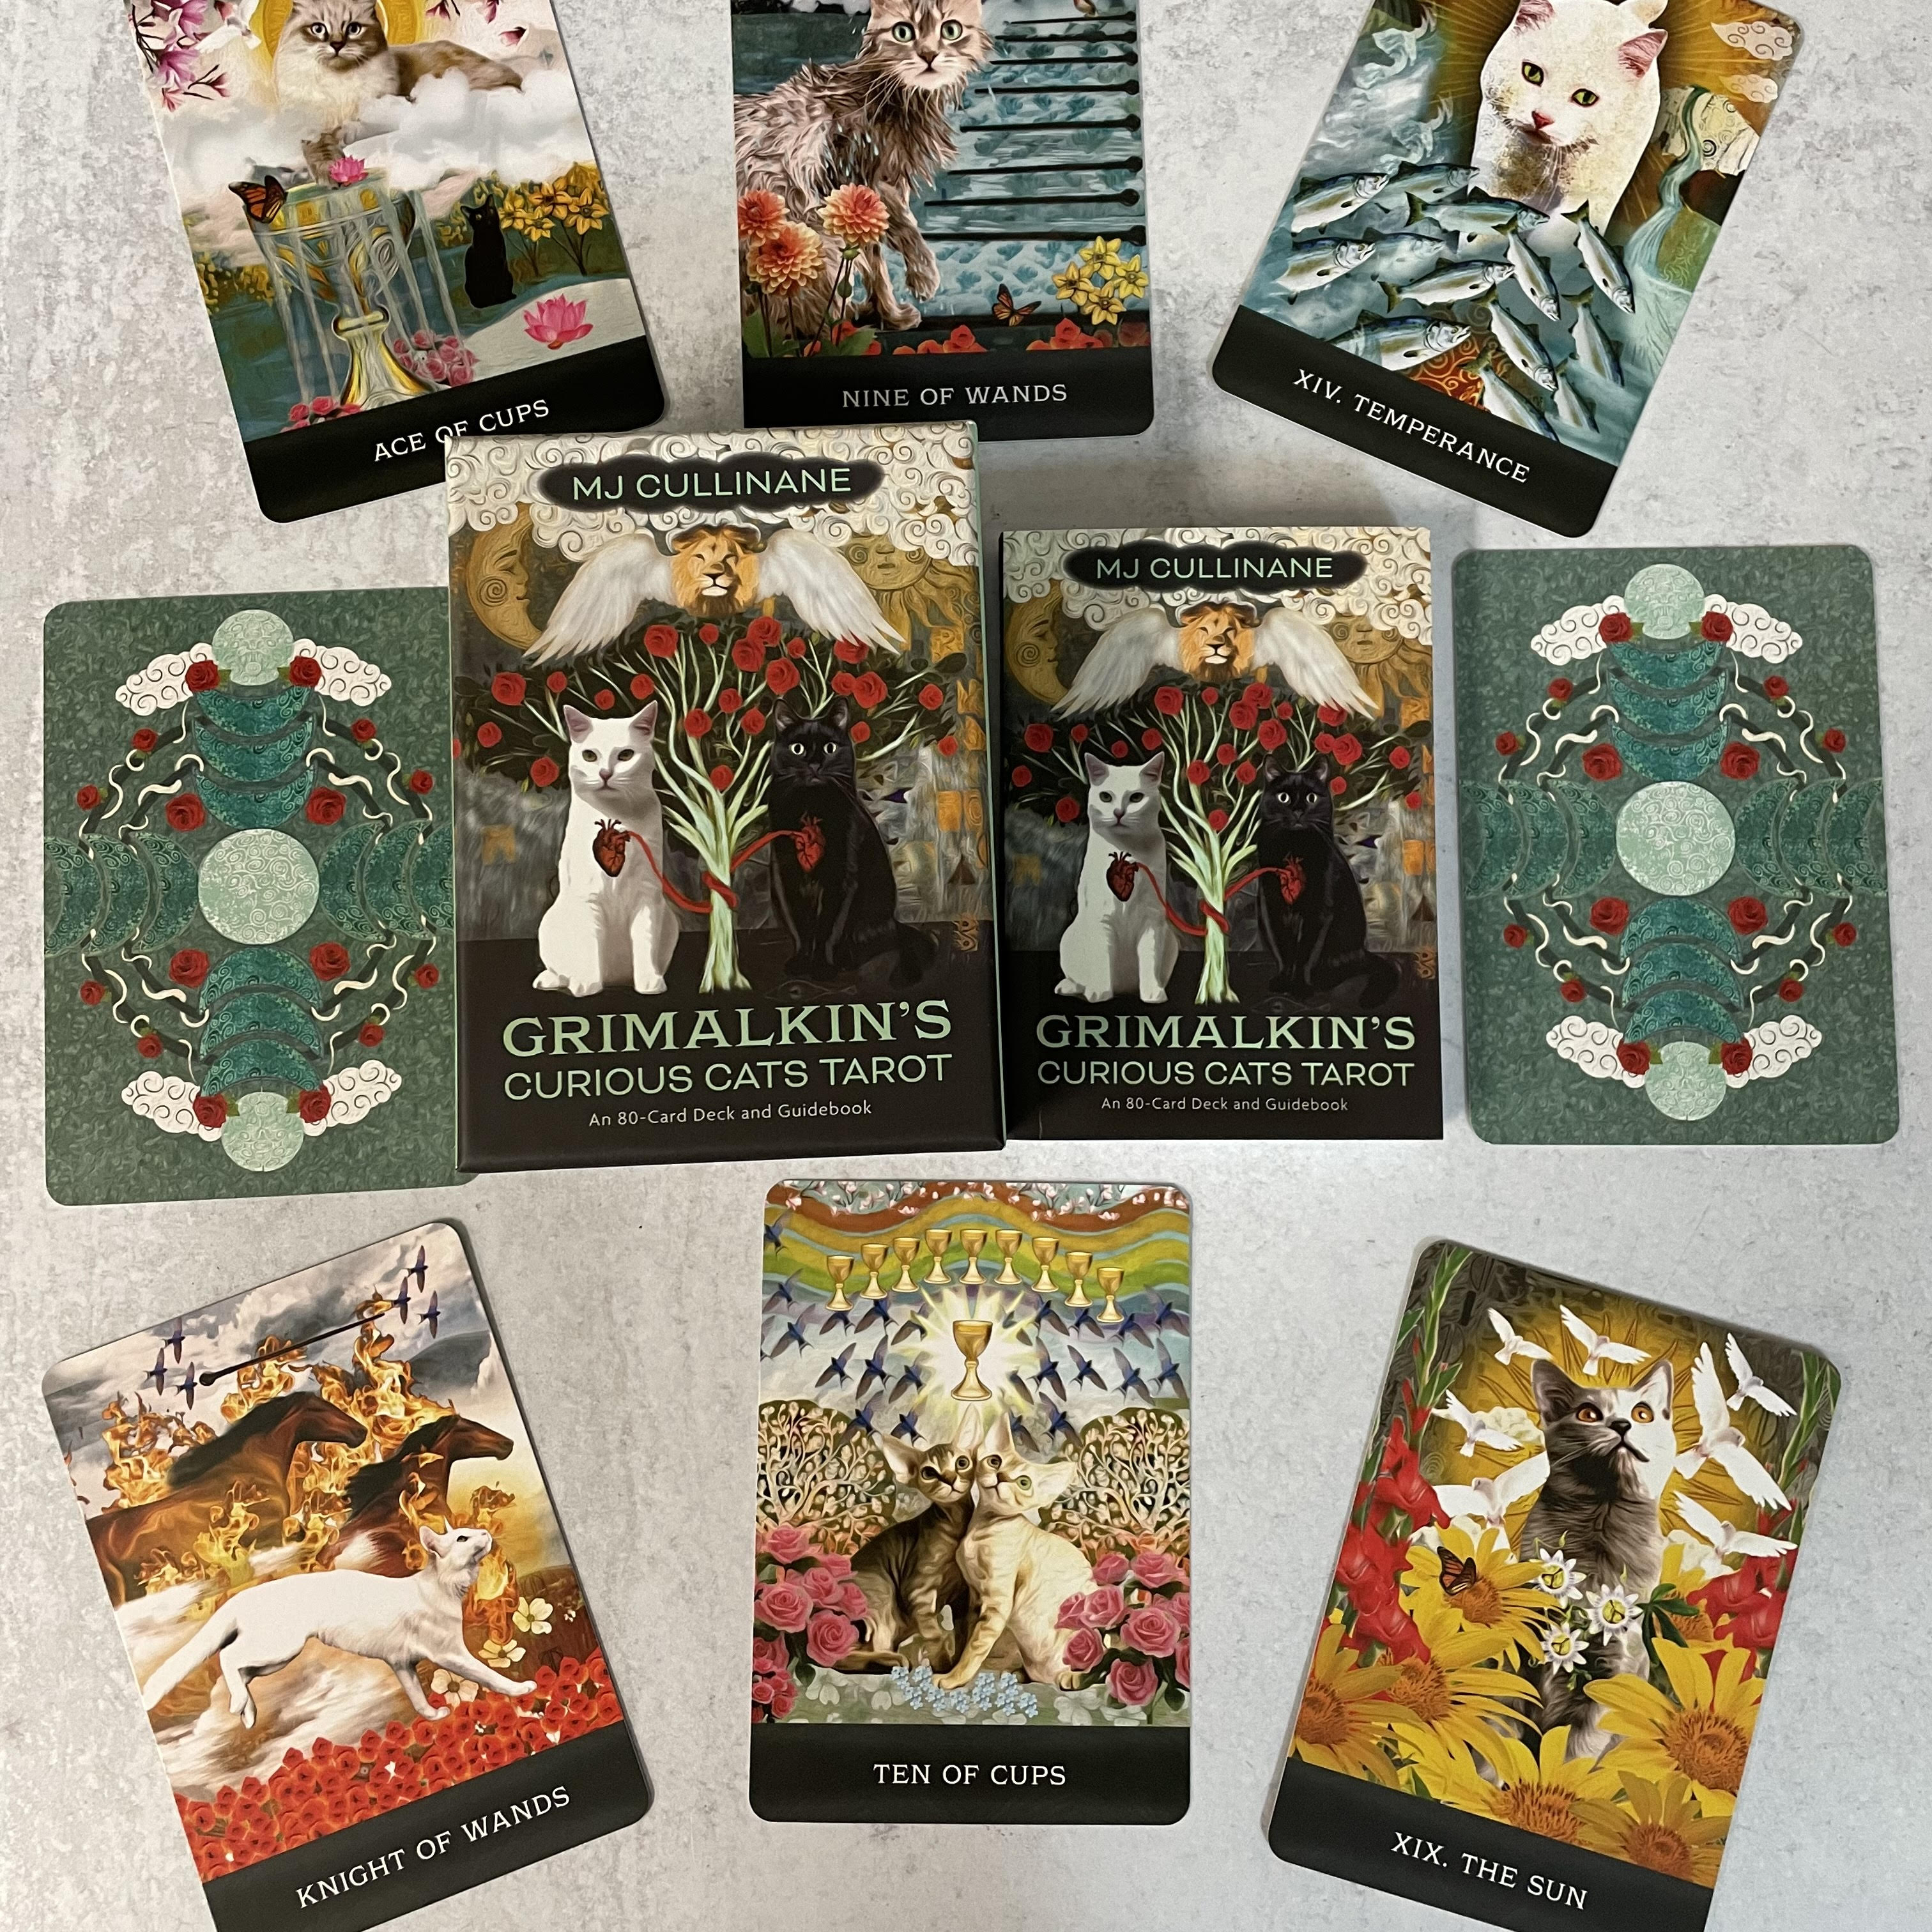 Grimalkin's Curious Cats Tarot: An 80-Card Deck and Guidebook by 